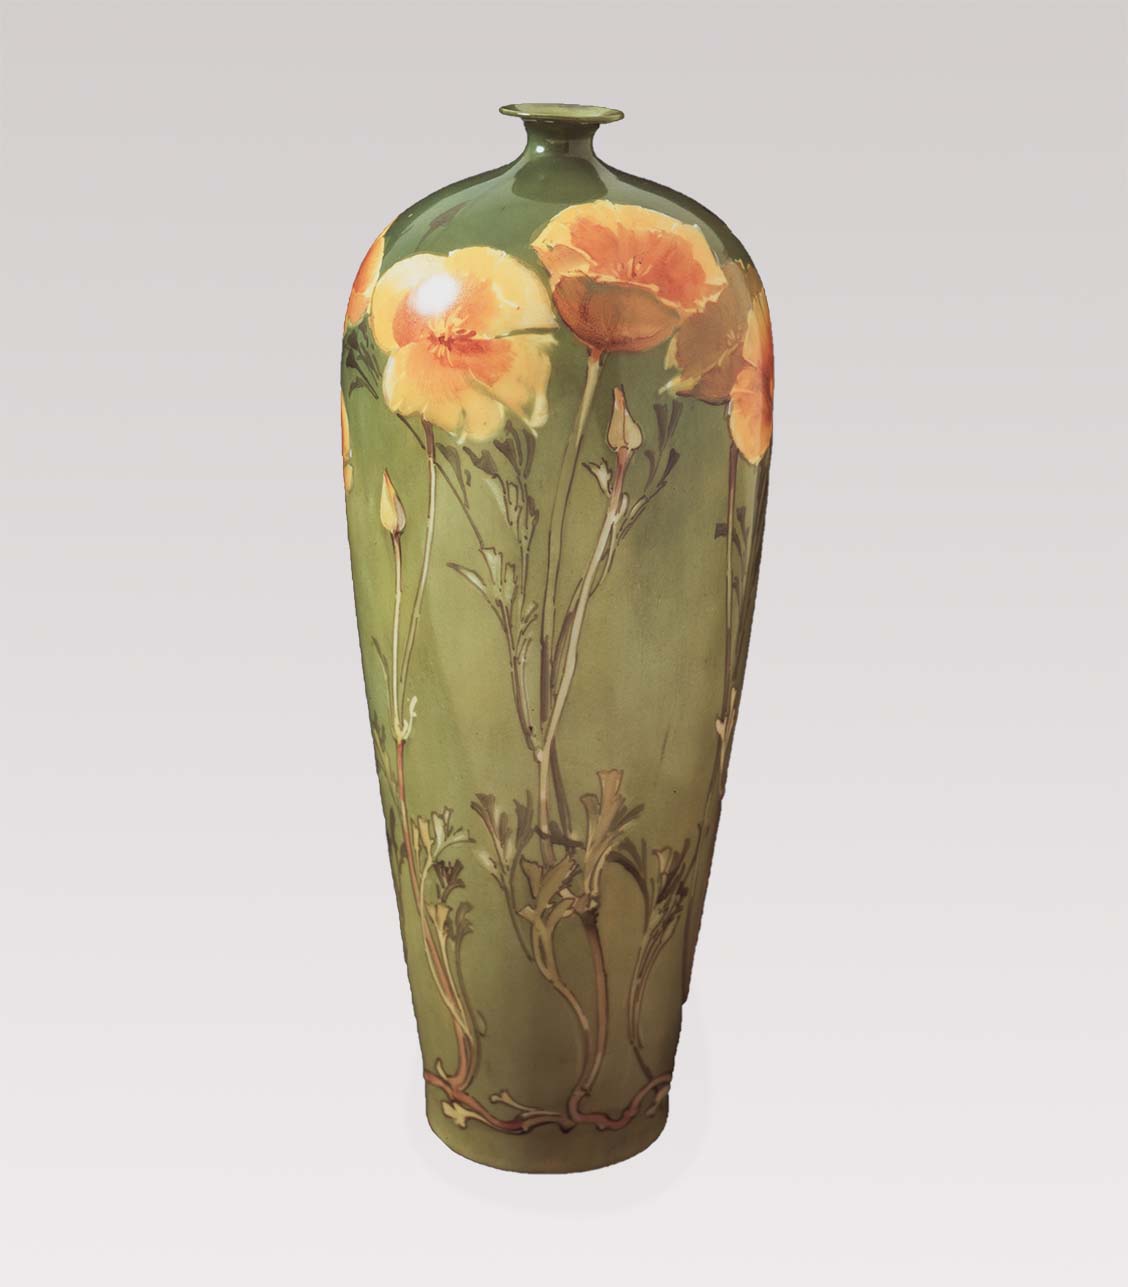 a slender green vase with golden poppies